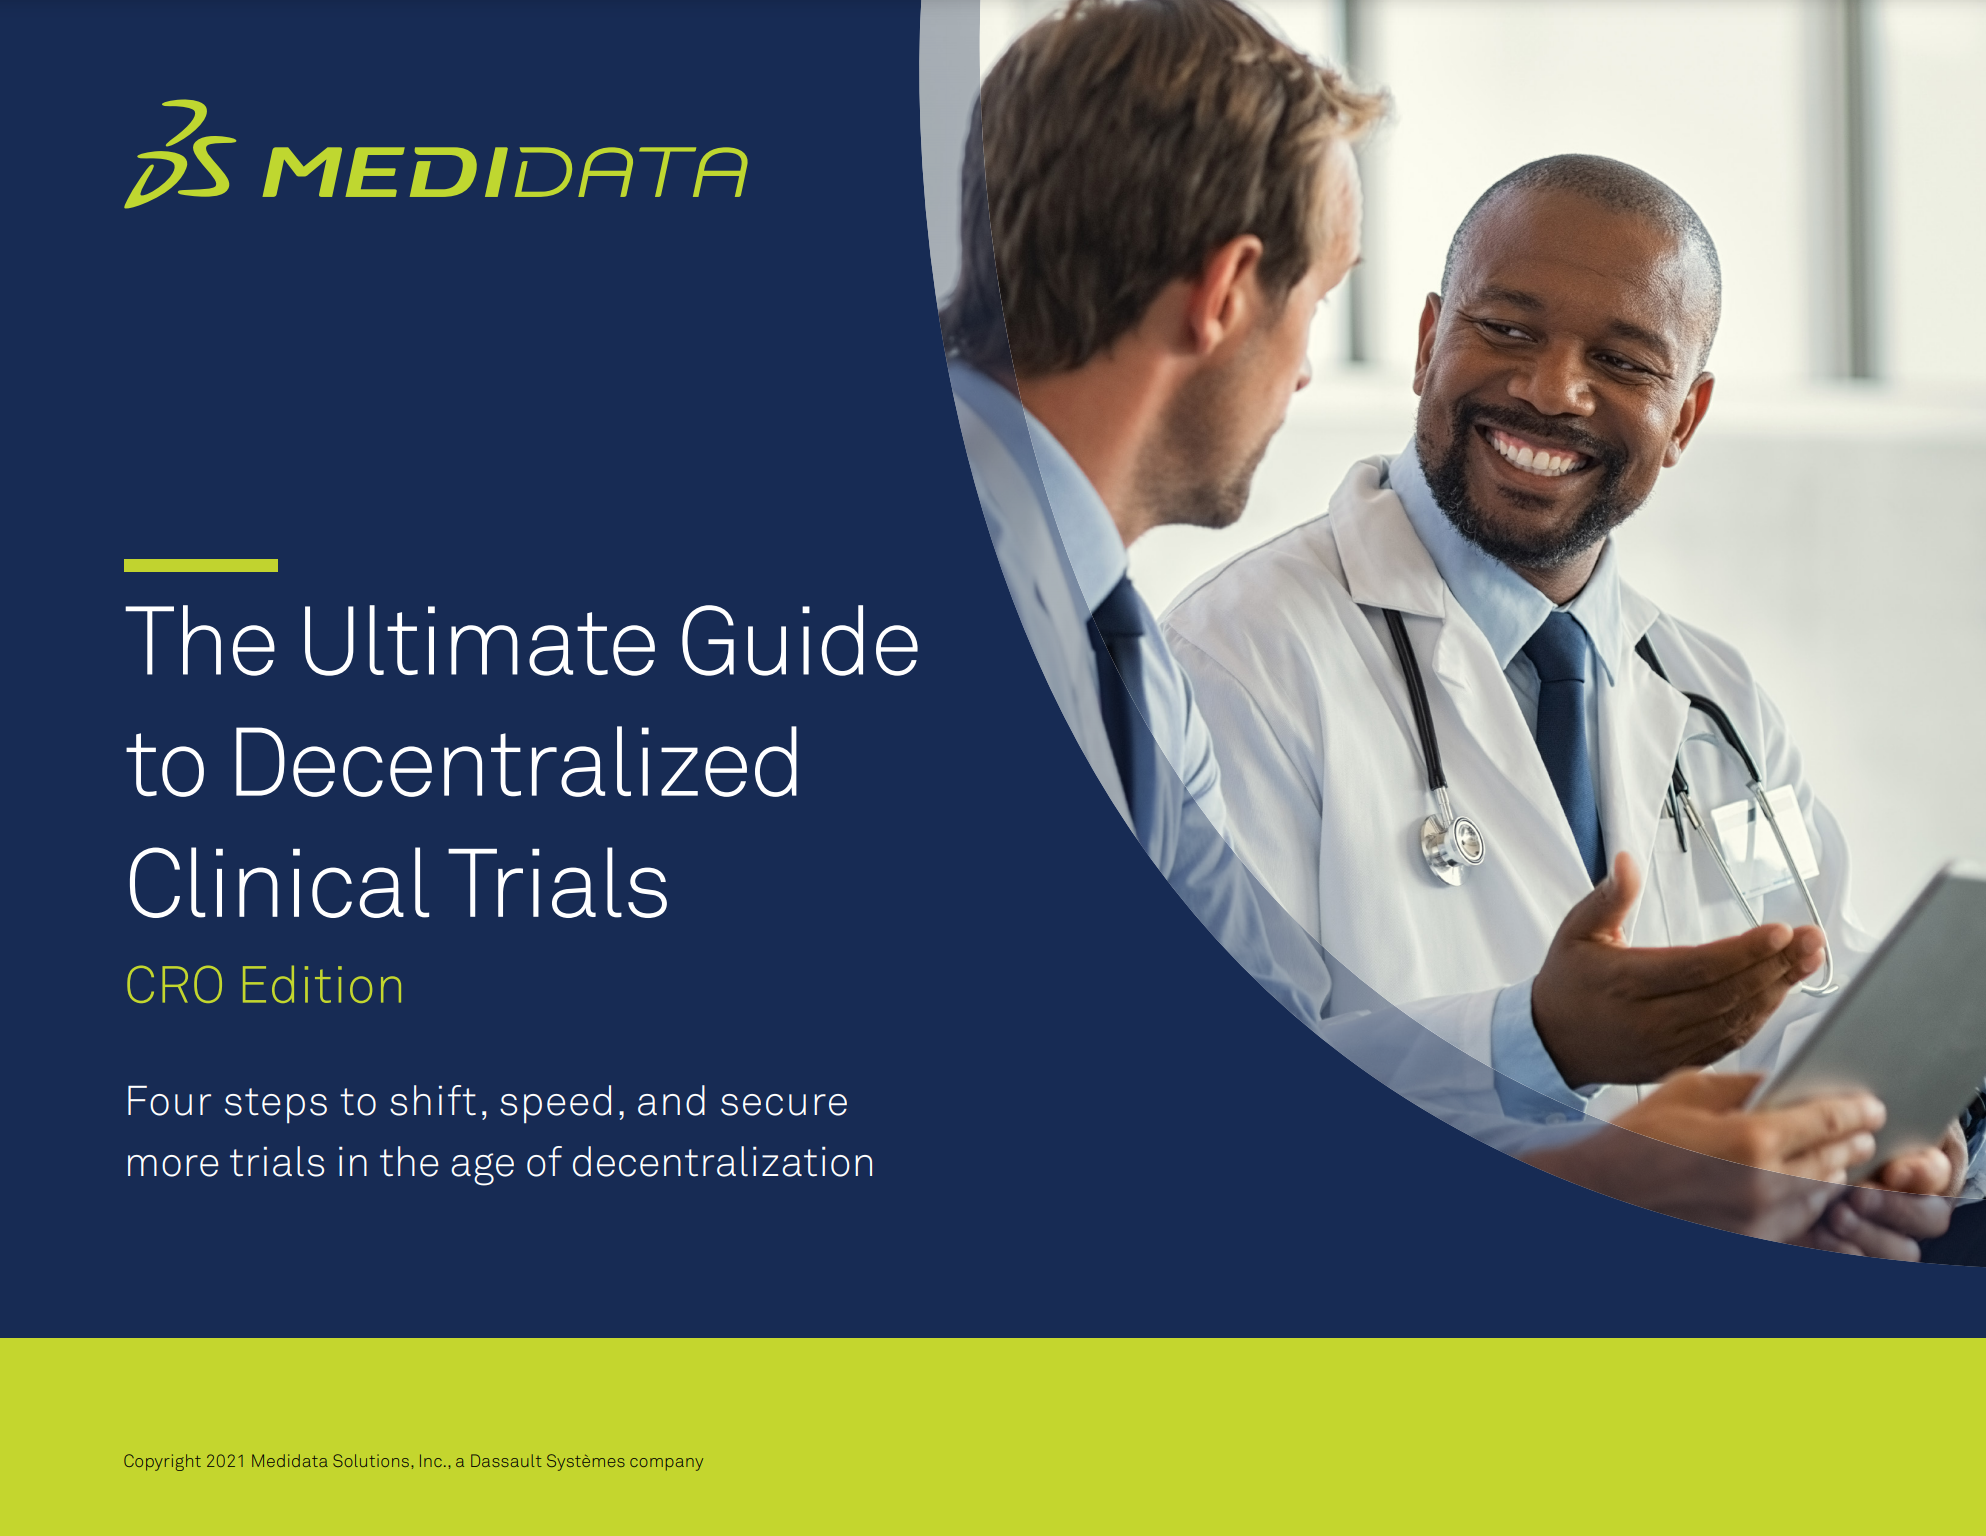 The Ultimate Guide to Decentralized Clinical Trials: CRO Edition